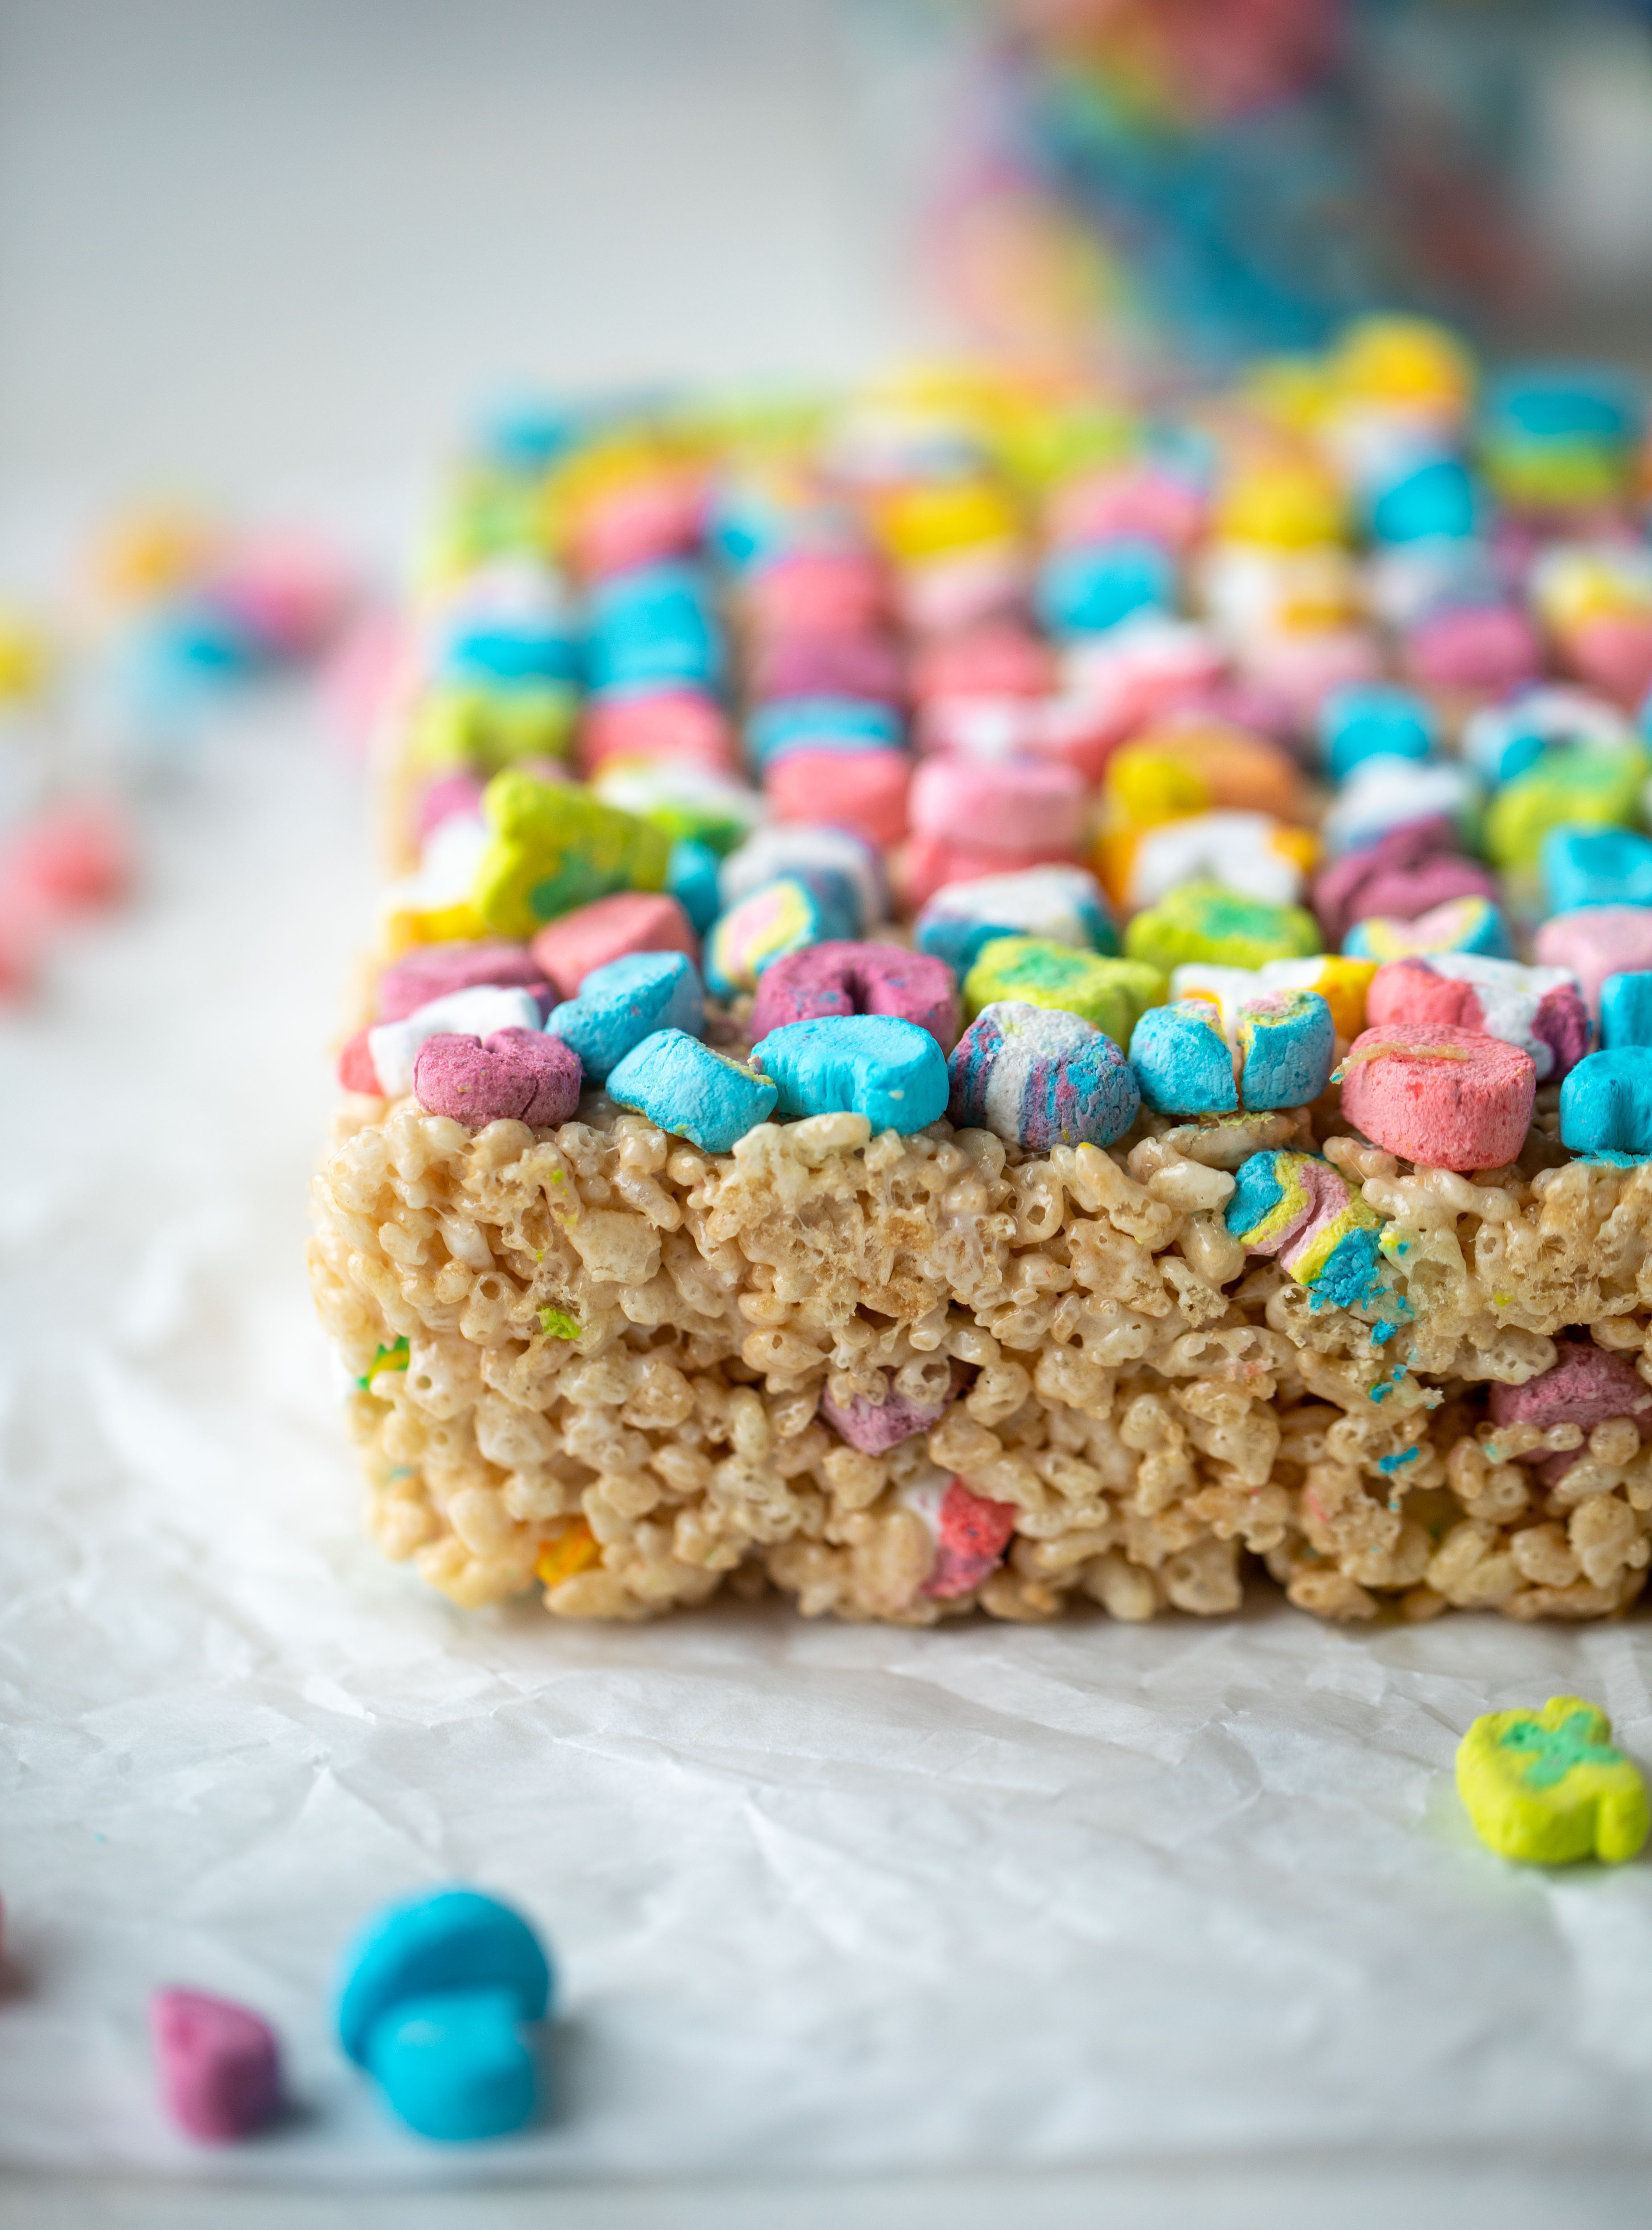 These lucky charms rice krispie treats are a throwback recipe to one of my favorite childhood treats! Here's a little festive twist for Saint Patrick's Day.